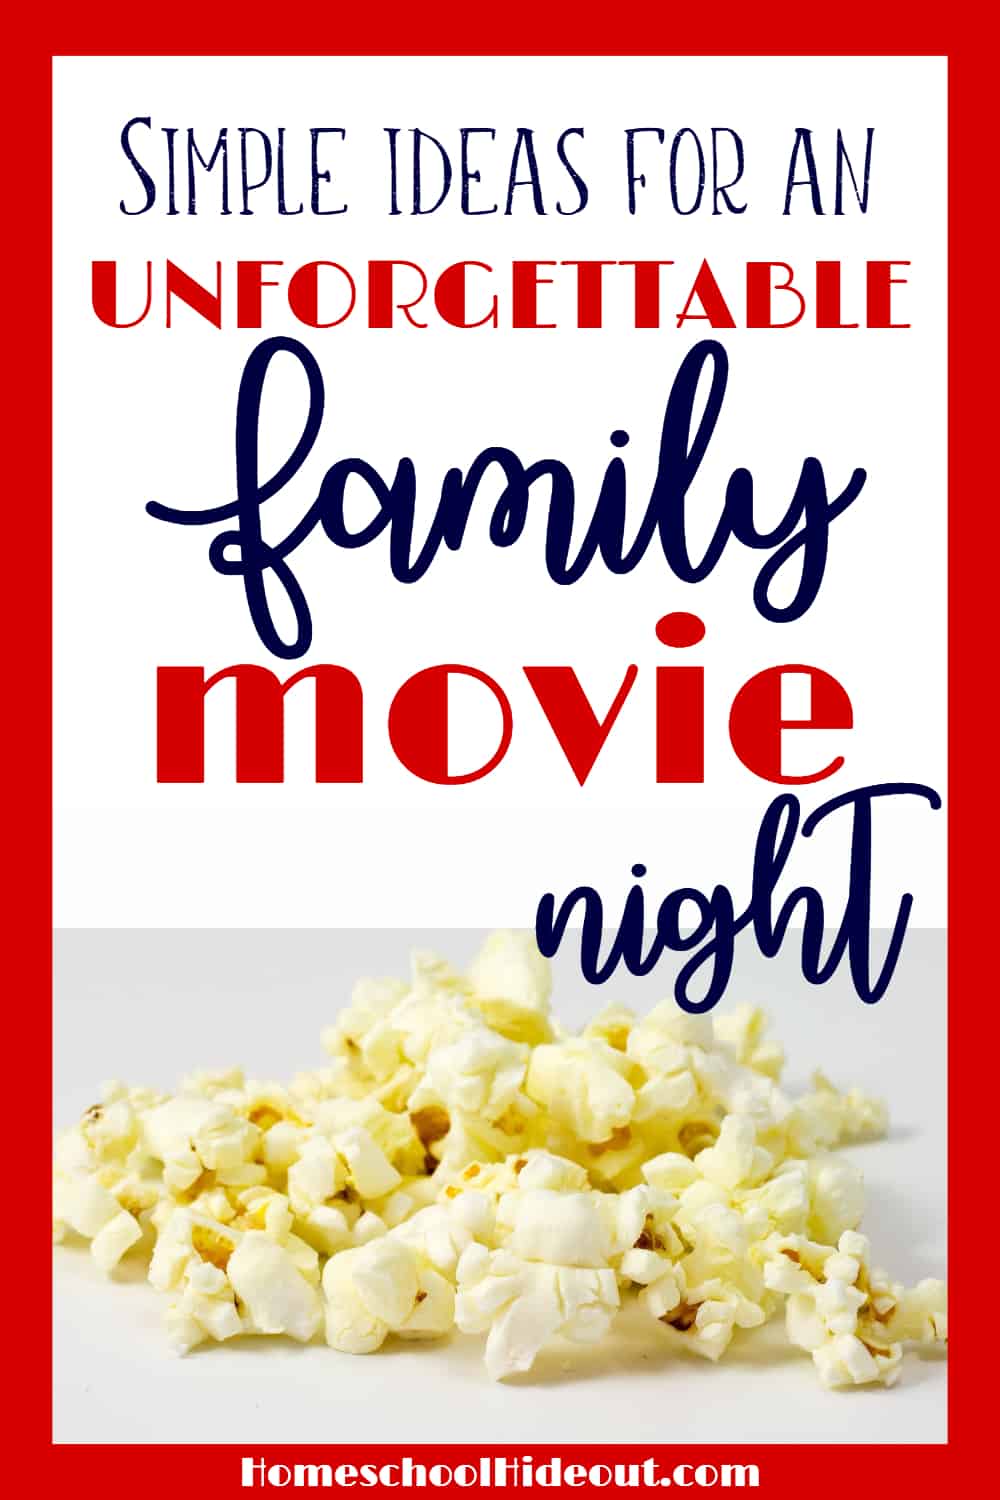 Family movies are the perfect chance to instill values and strong character in our kids. Check out these tips for fun and learning ideas to make your next movie night unforgettable.